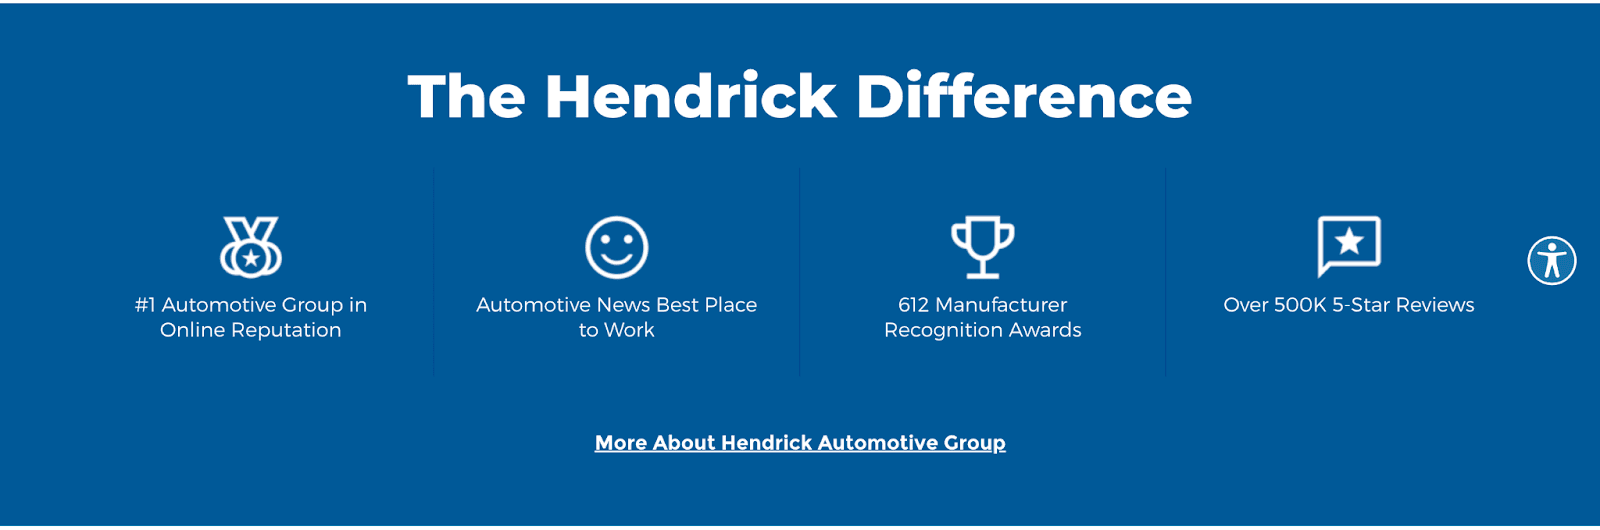 landing page for hendrick cars 4